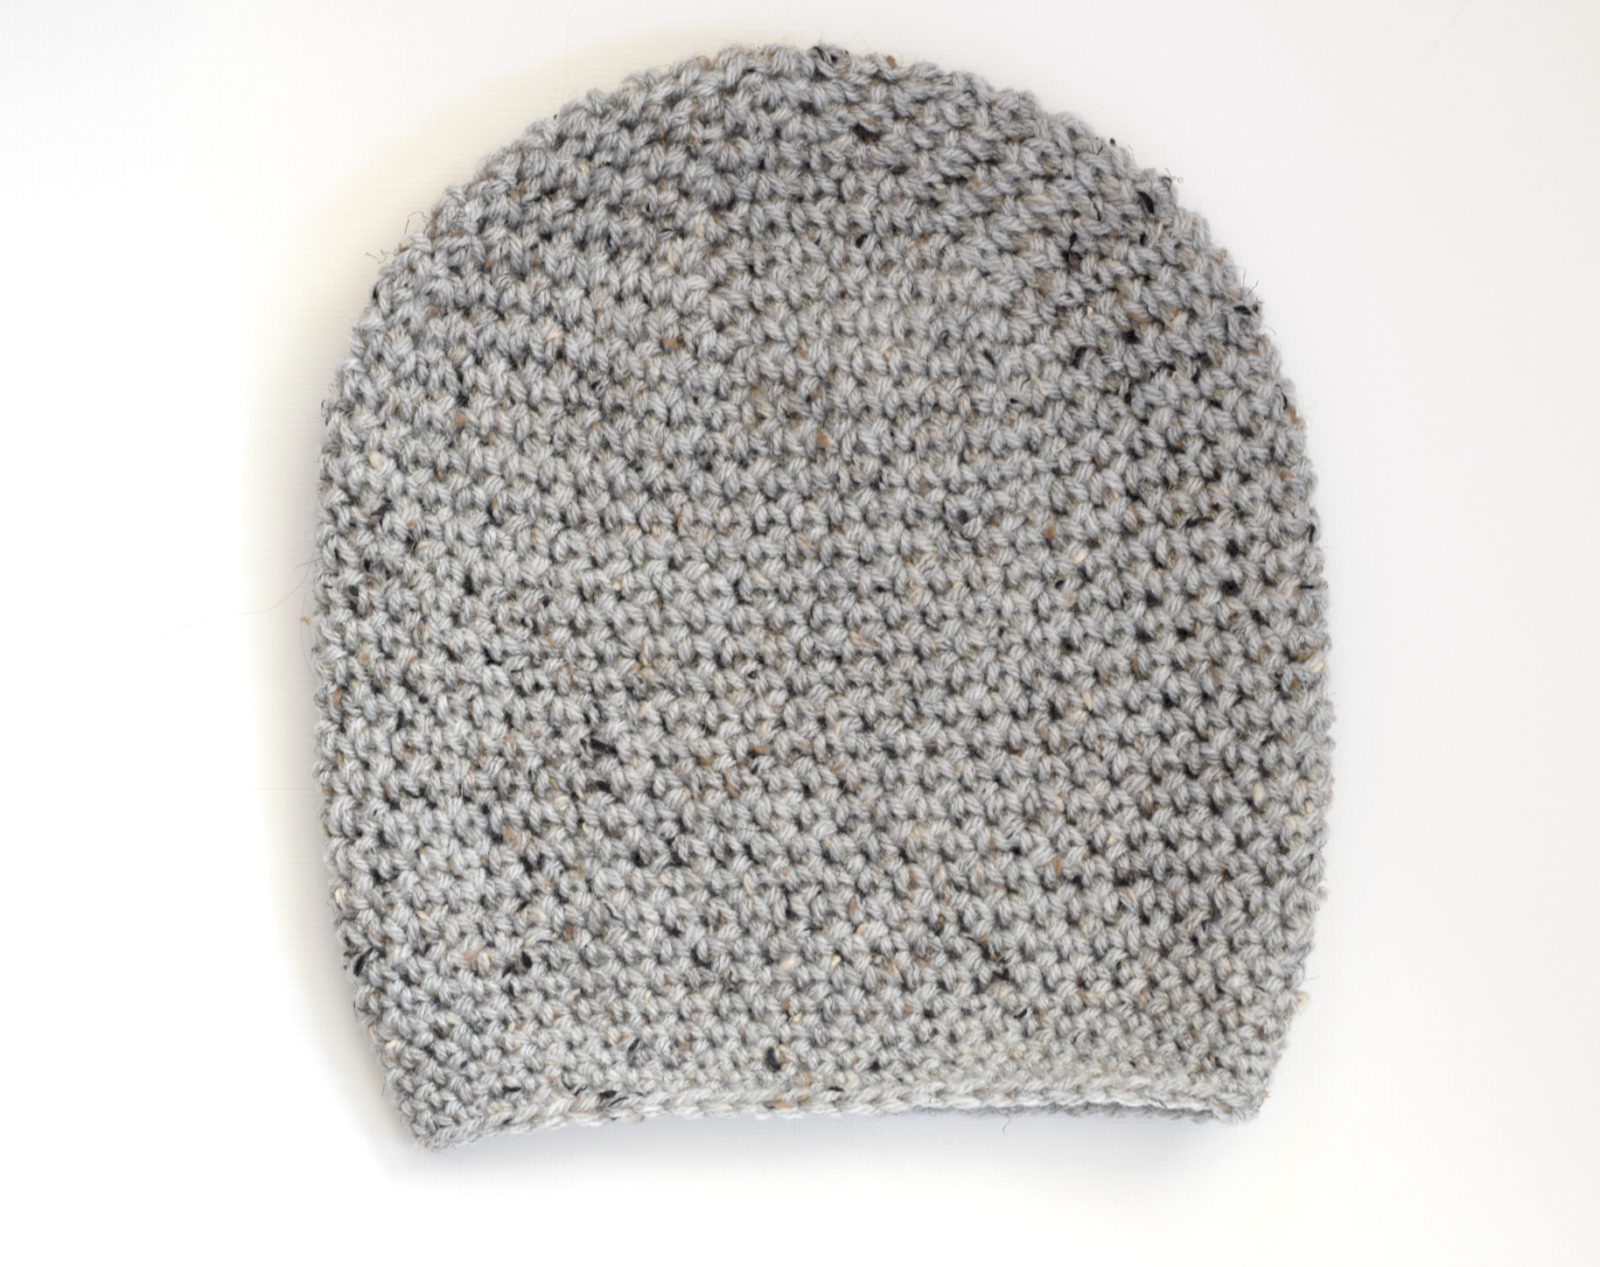 Easy Crochet Slouchy Hat Pattern How To Crochet An Easy Slouchy Hat East Village Slouch Mama In